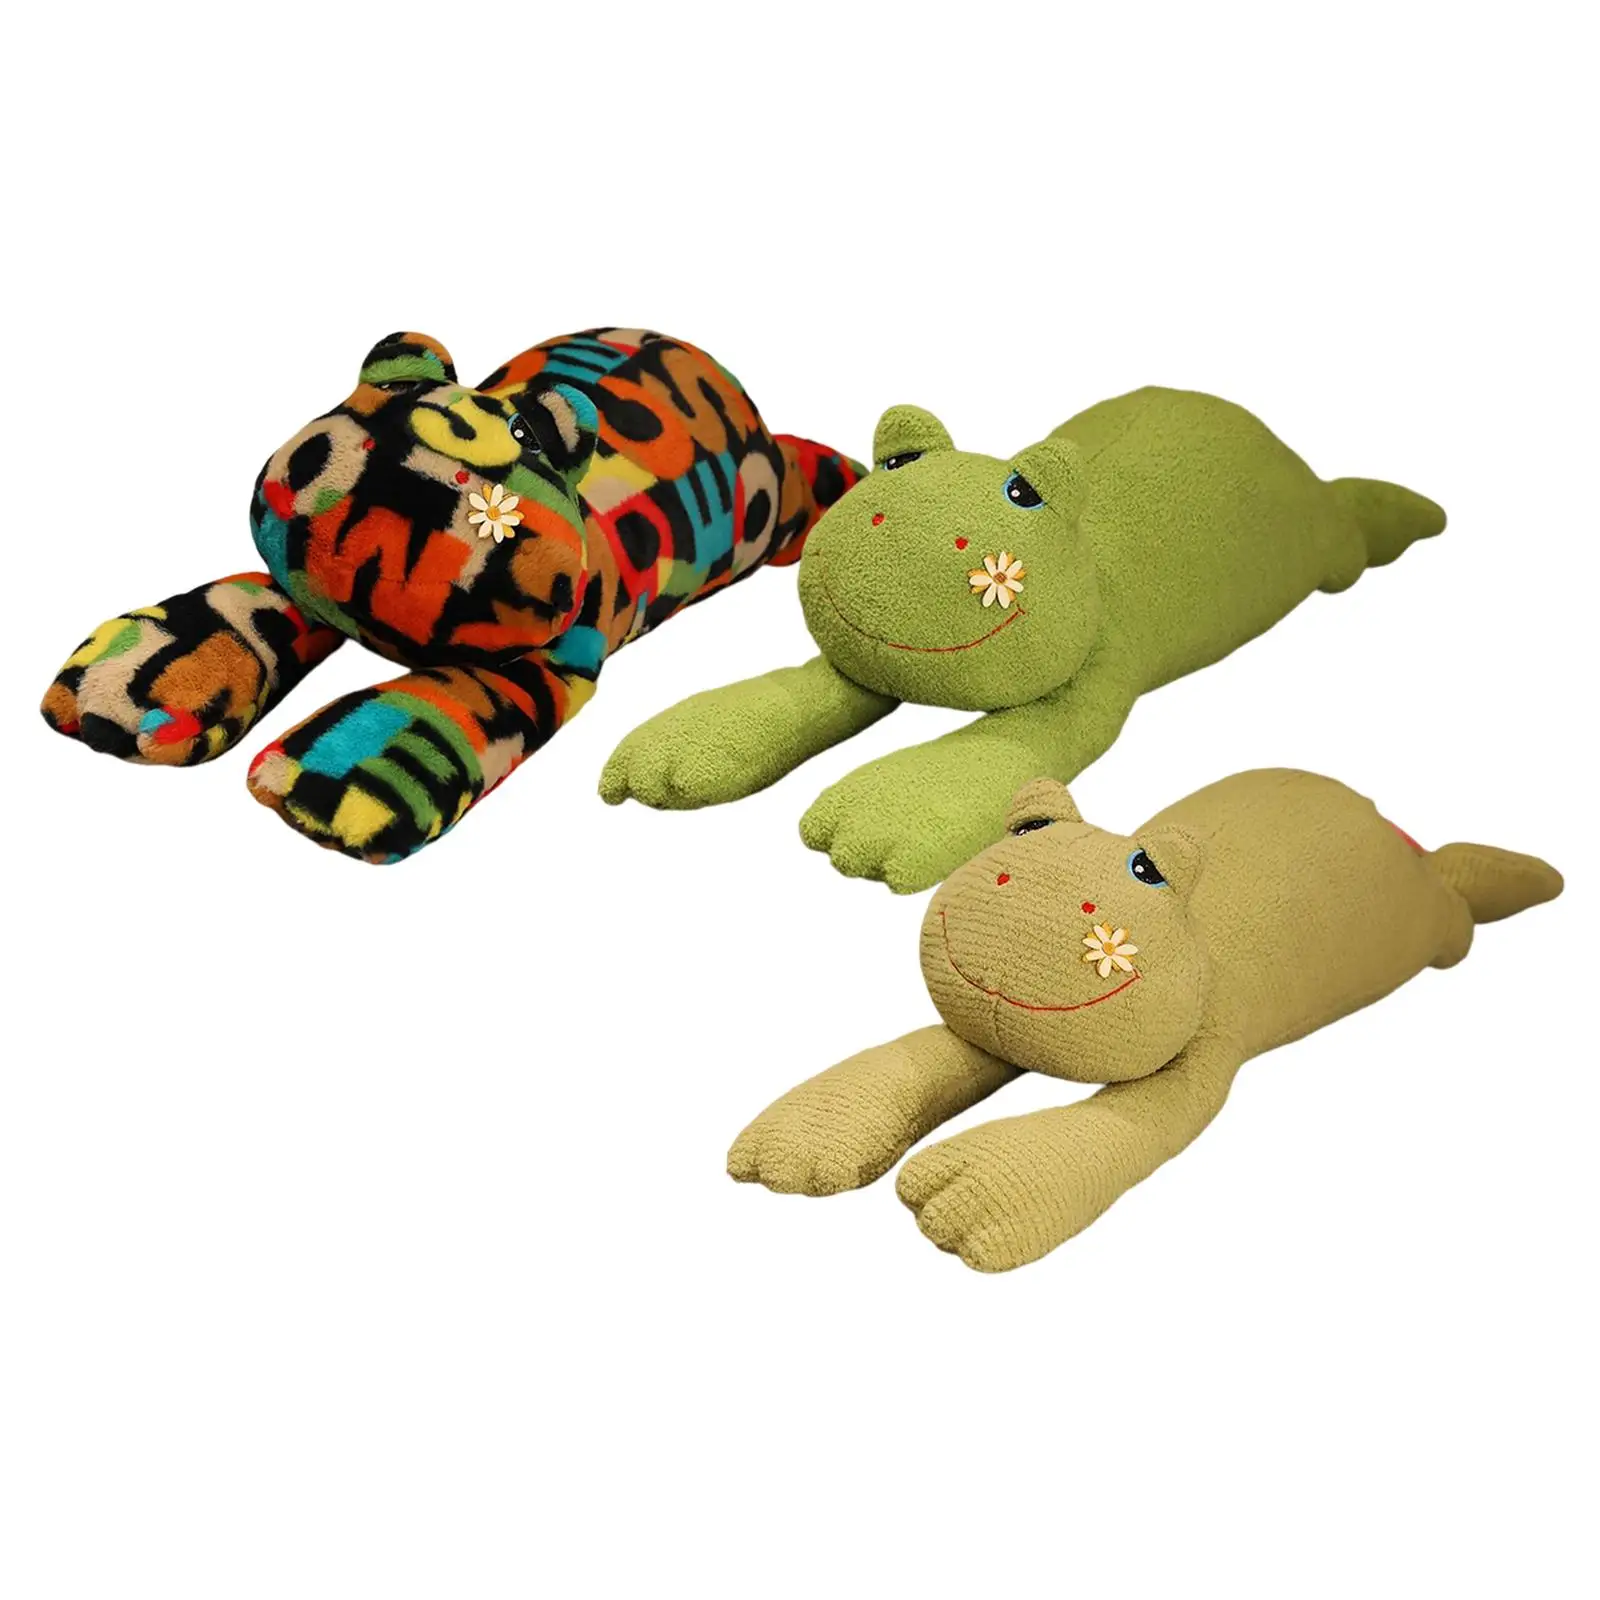 cuddly Frog Plush Toy ,pillow ,Adorable Stuffed Animal for Theme Party